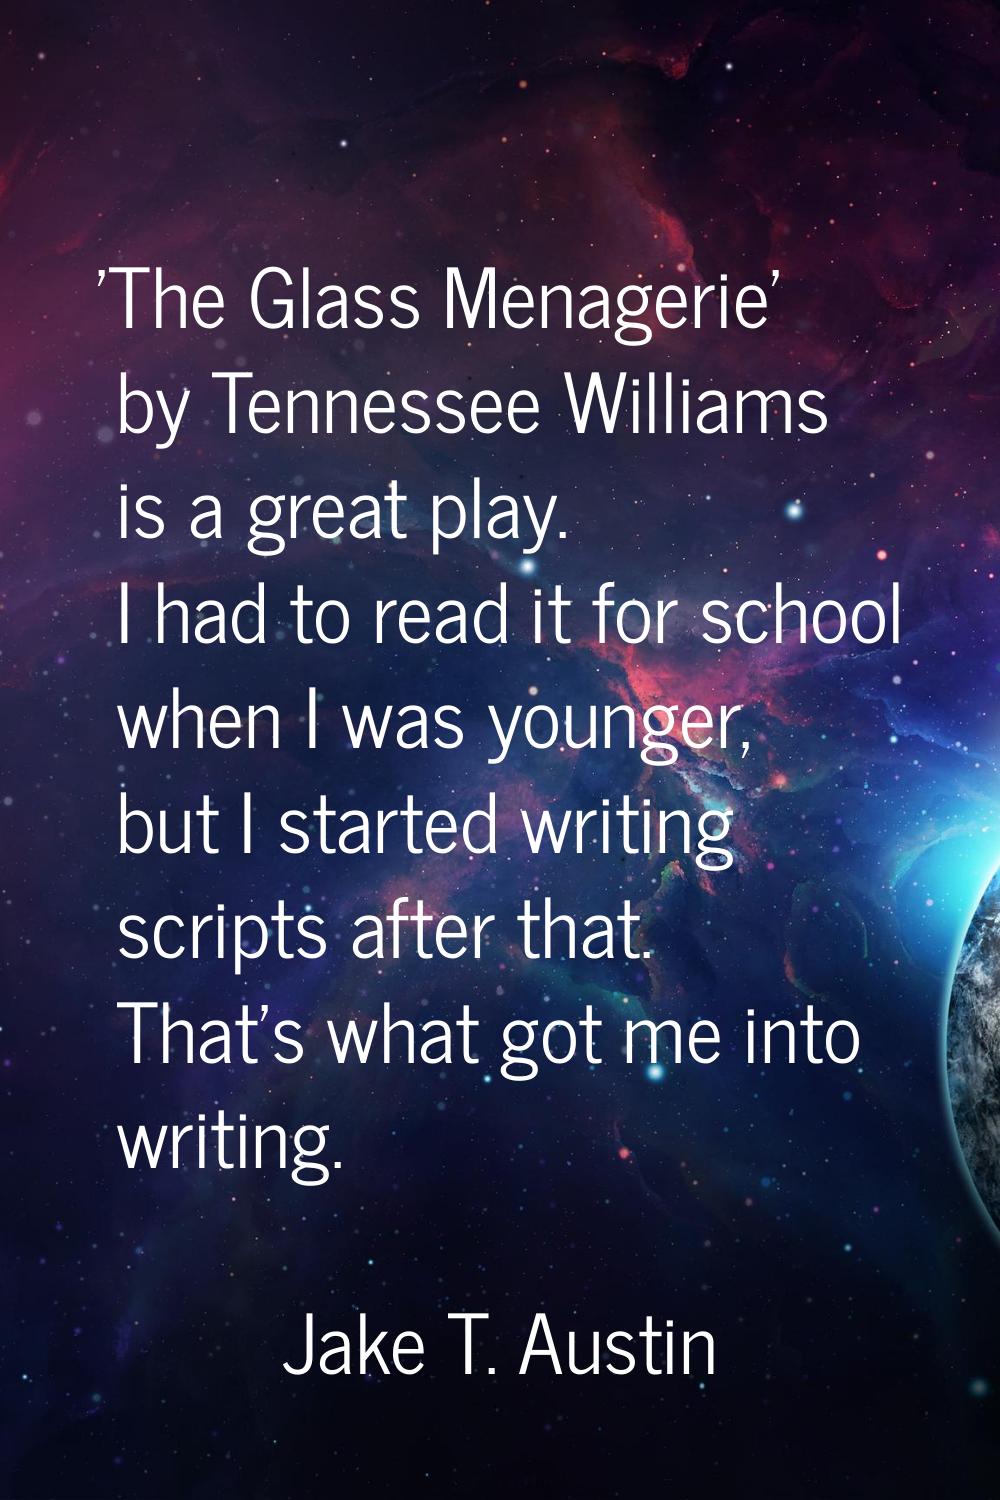 'The Glass Menagerie' by Tennessee Williams is a great play. I had to read it for school when I was